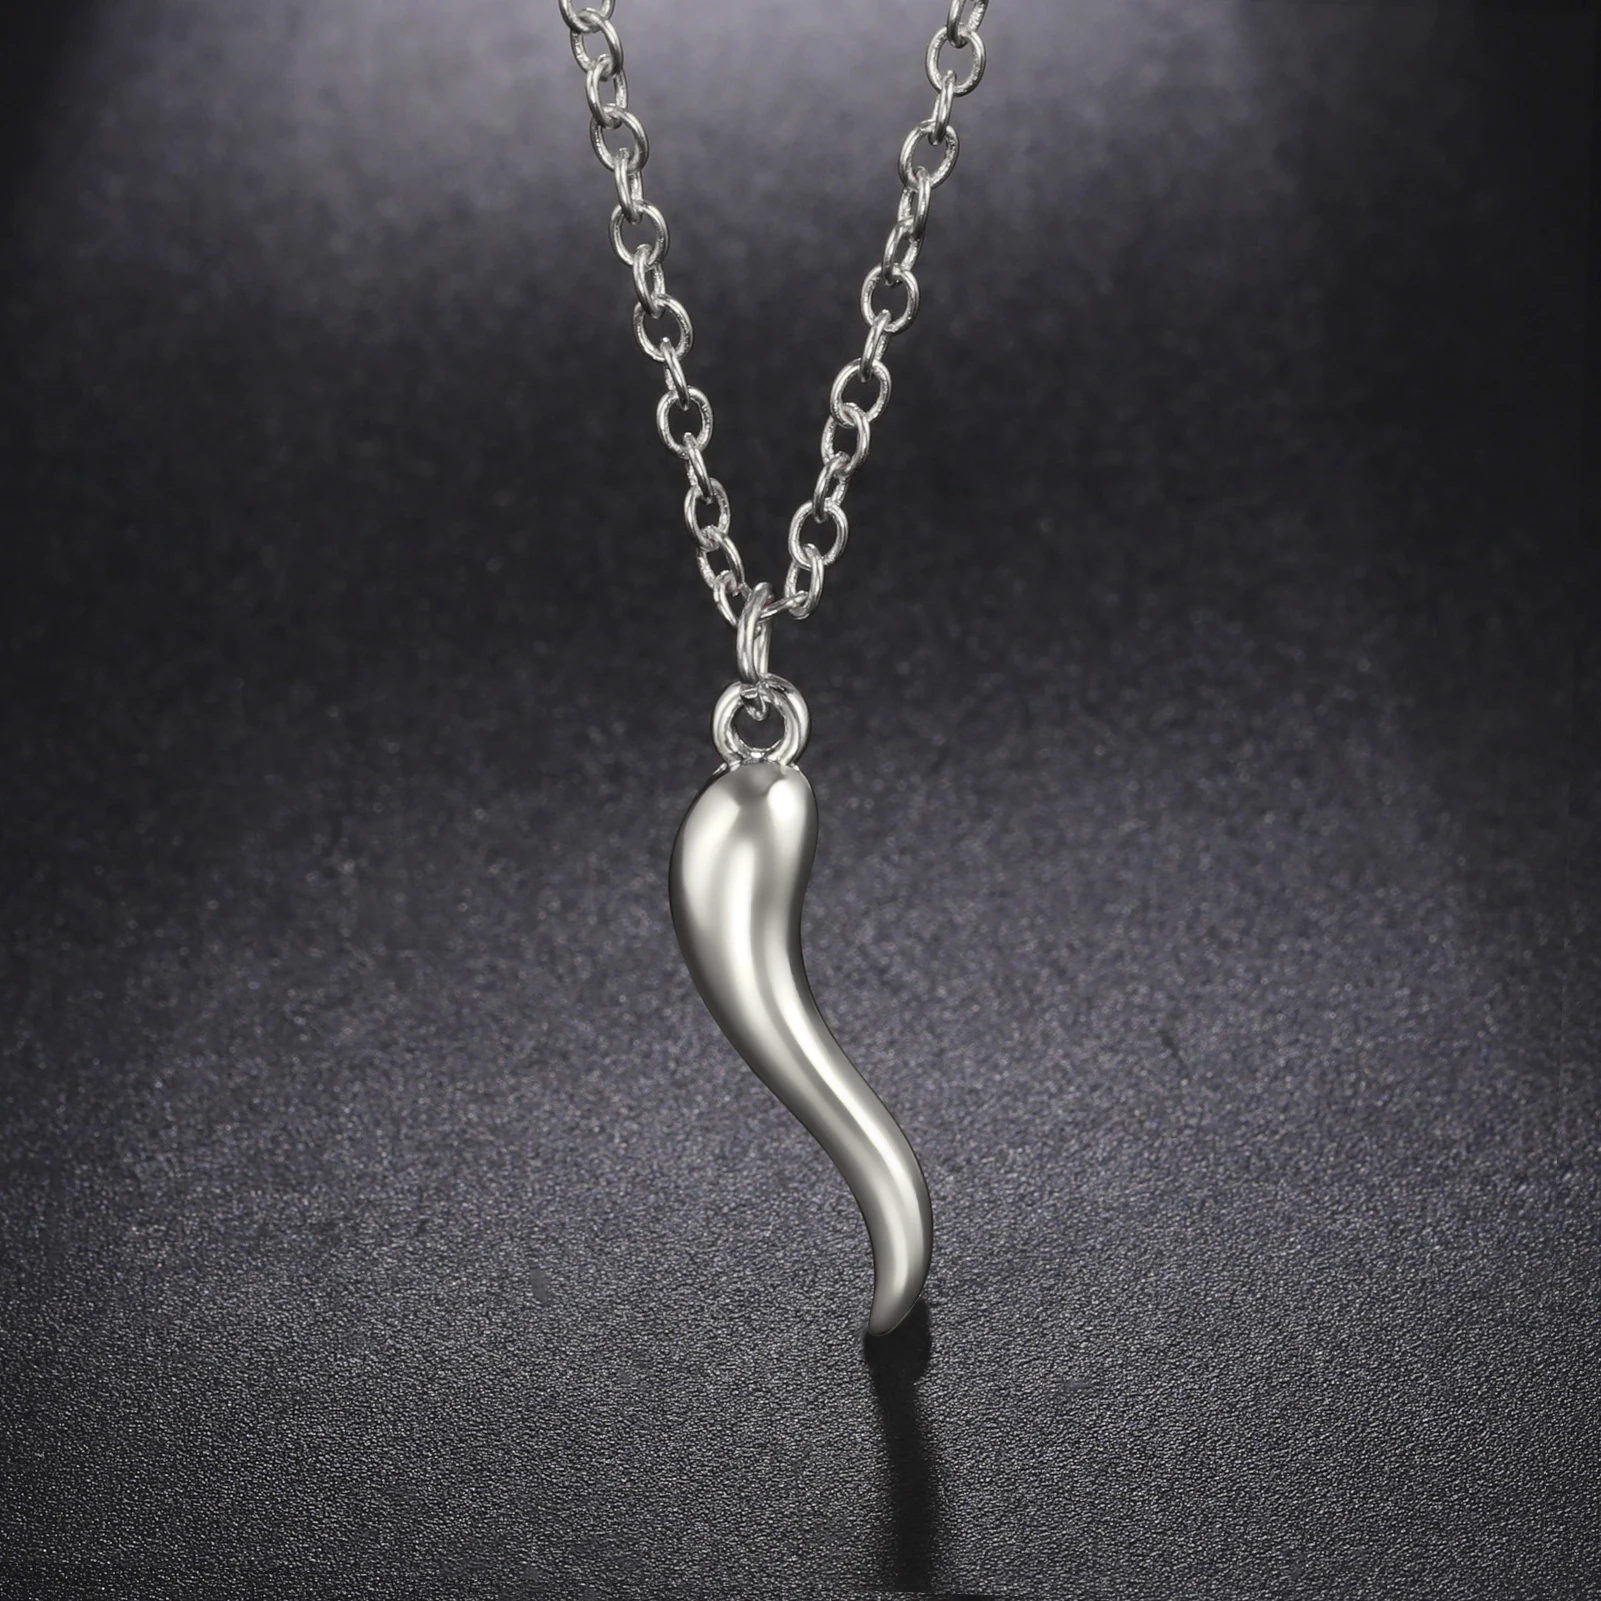 Banter Large Italian Horn Necklace Charm in Sterling Silver | Westland Mall